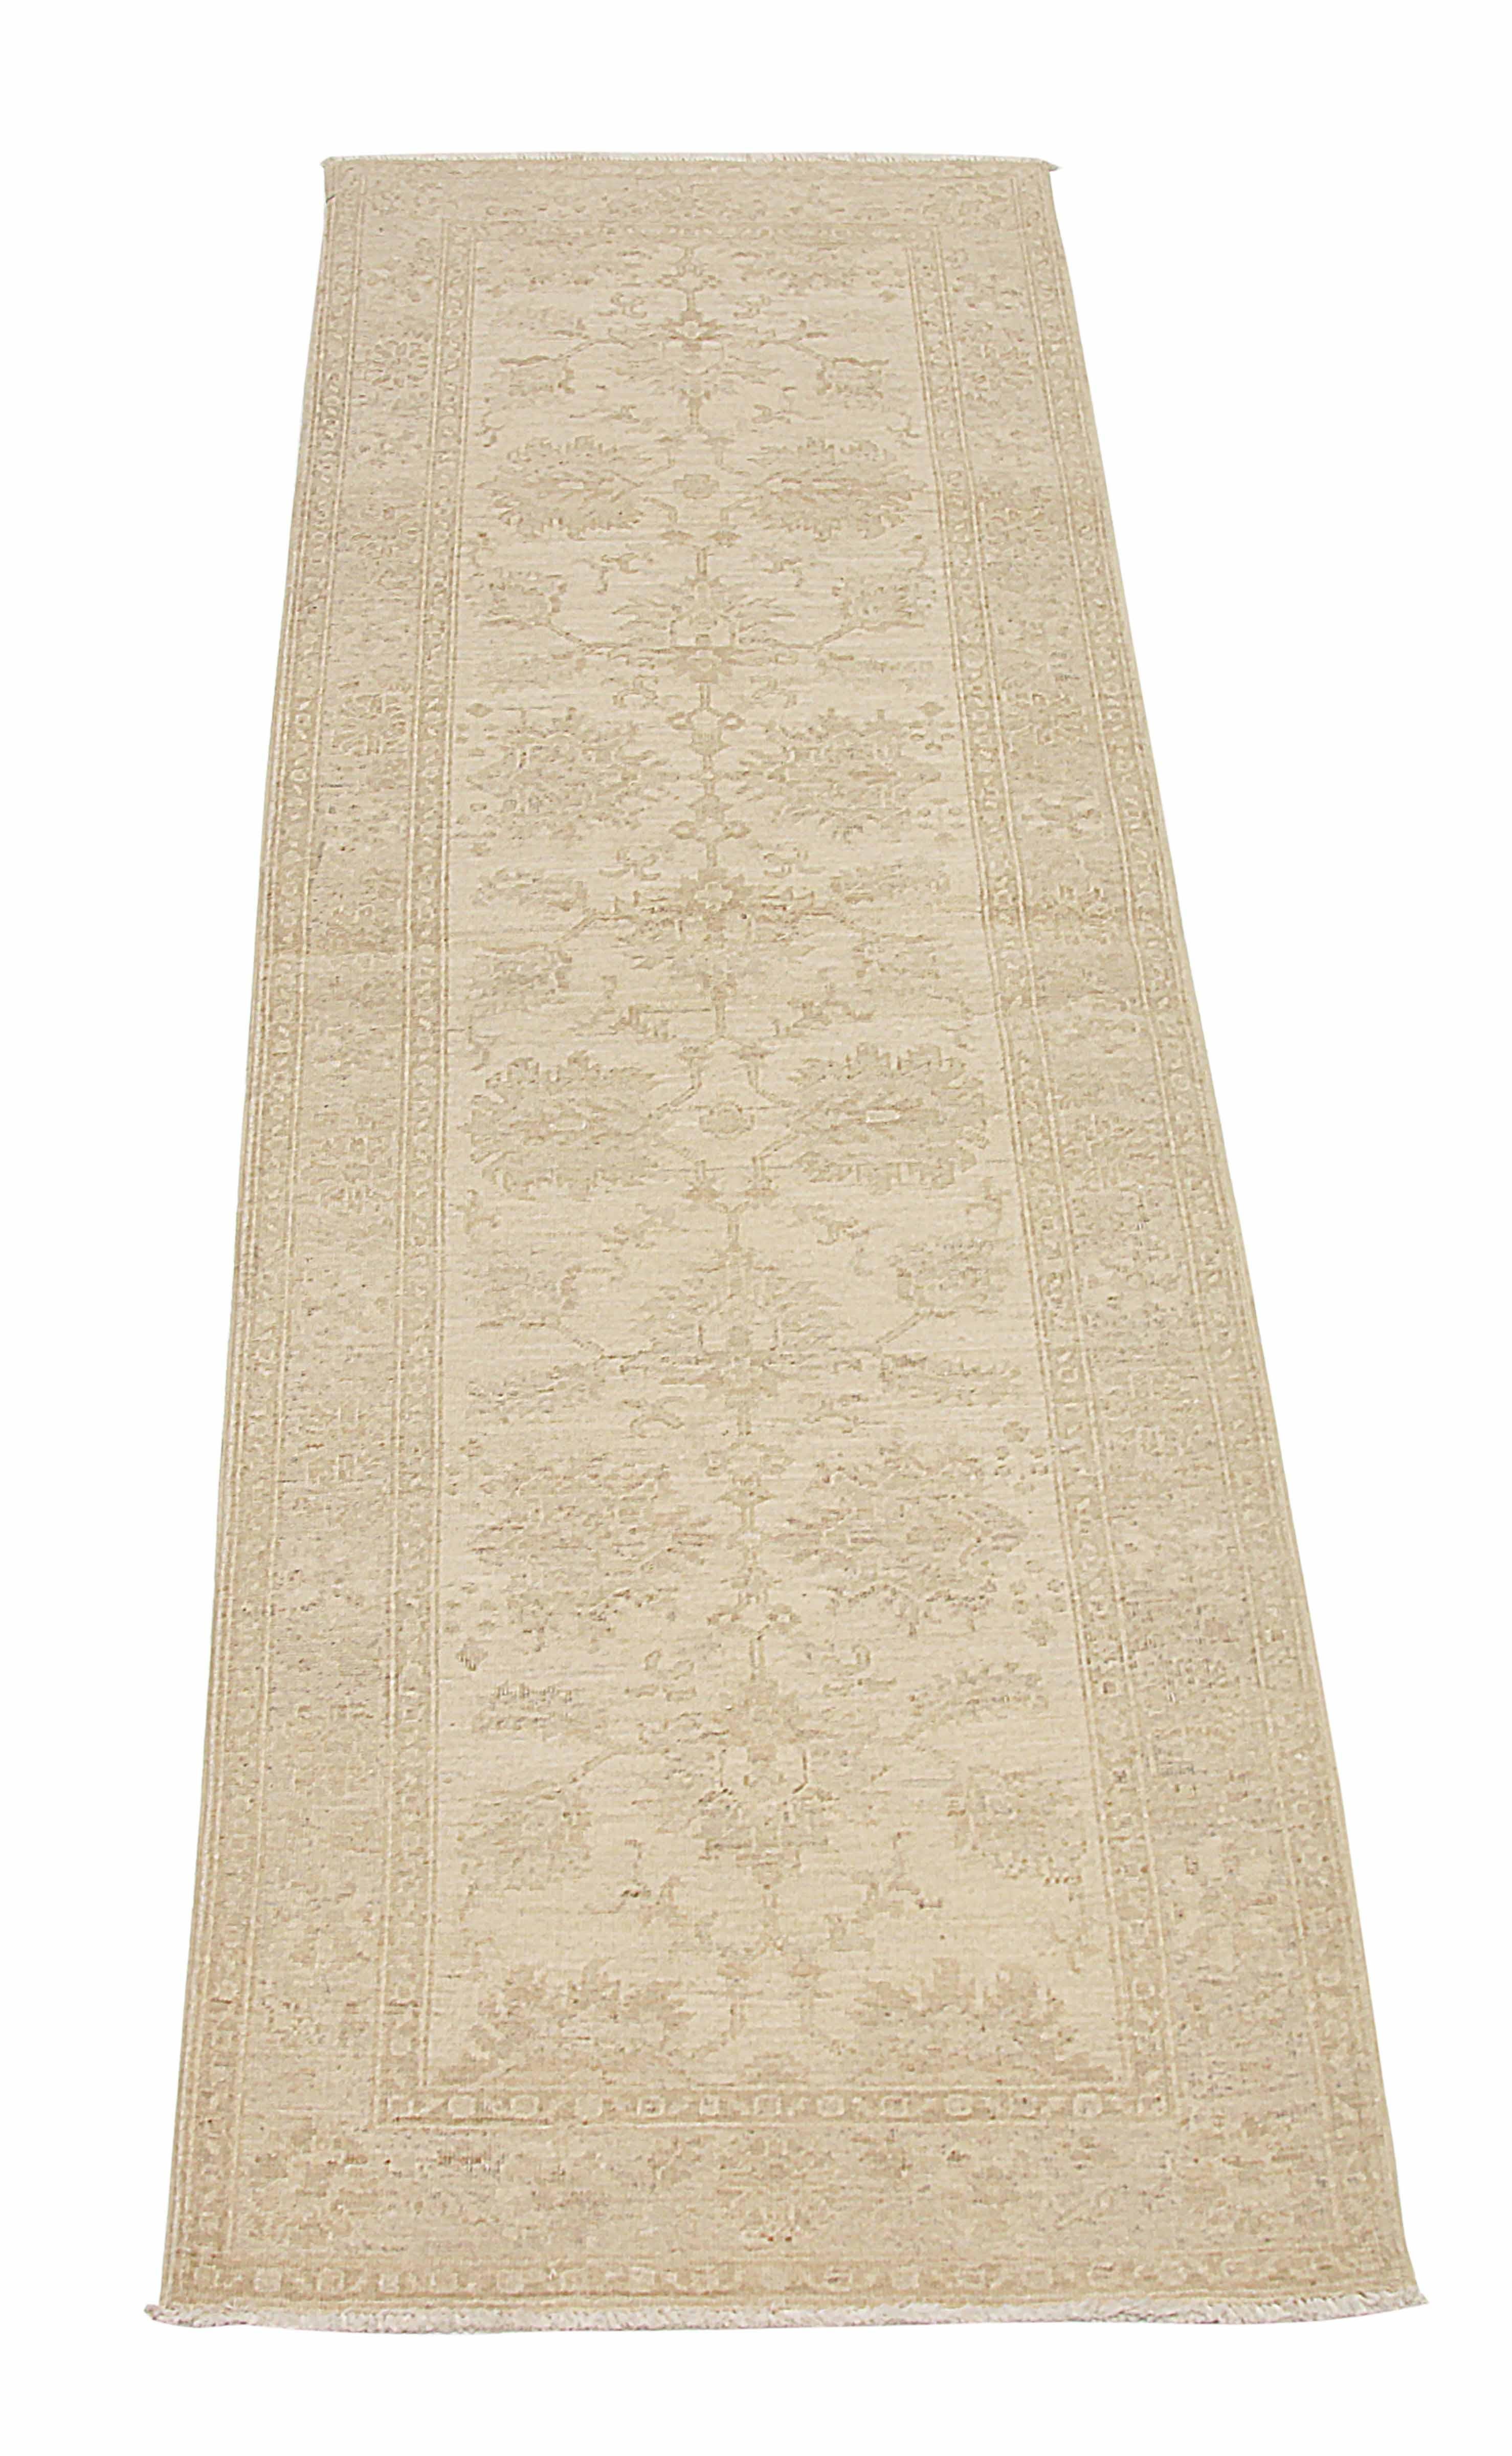 Add a touch of elegance and sophistication to your home with this beautifully handwoven runner rug. Crafted from the finest sheep's wool and colored with all-natural vegetable dyes that are safe for humans and pets, this runner rug is not only